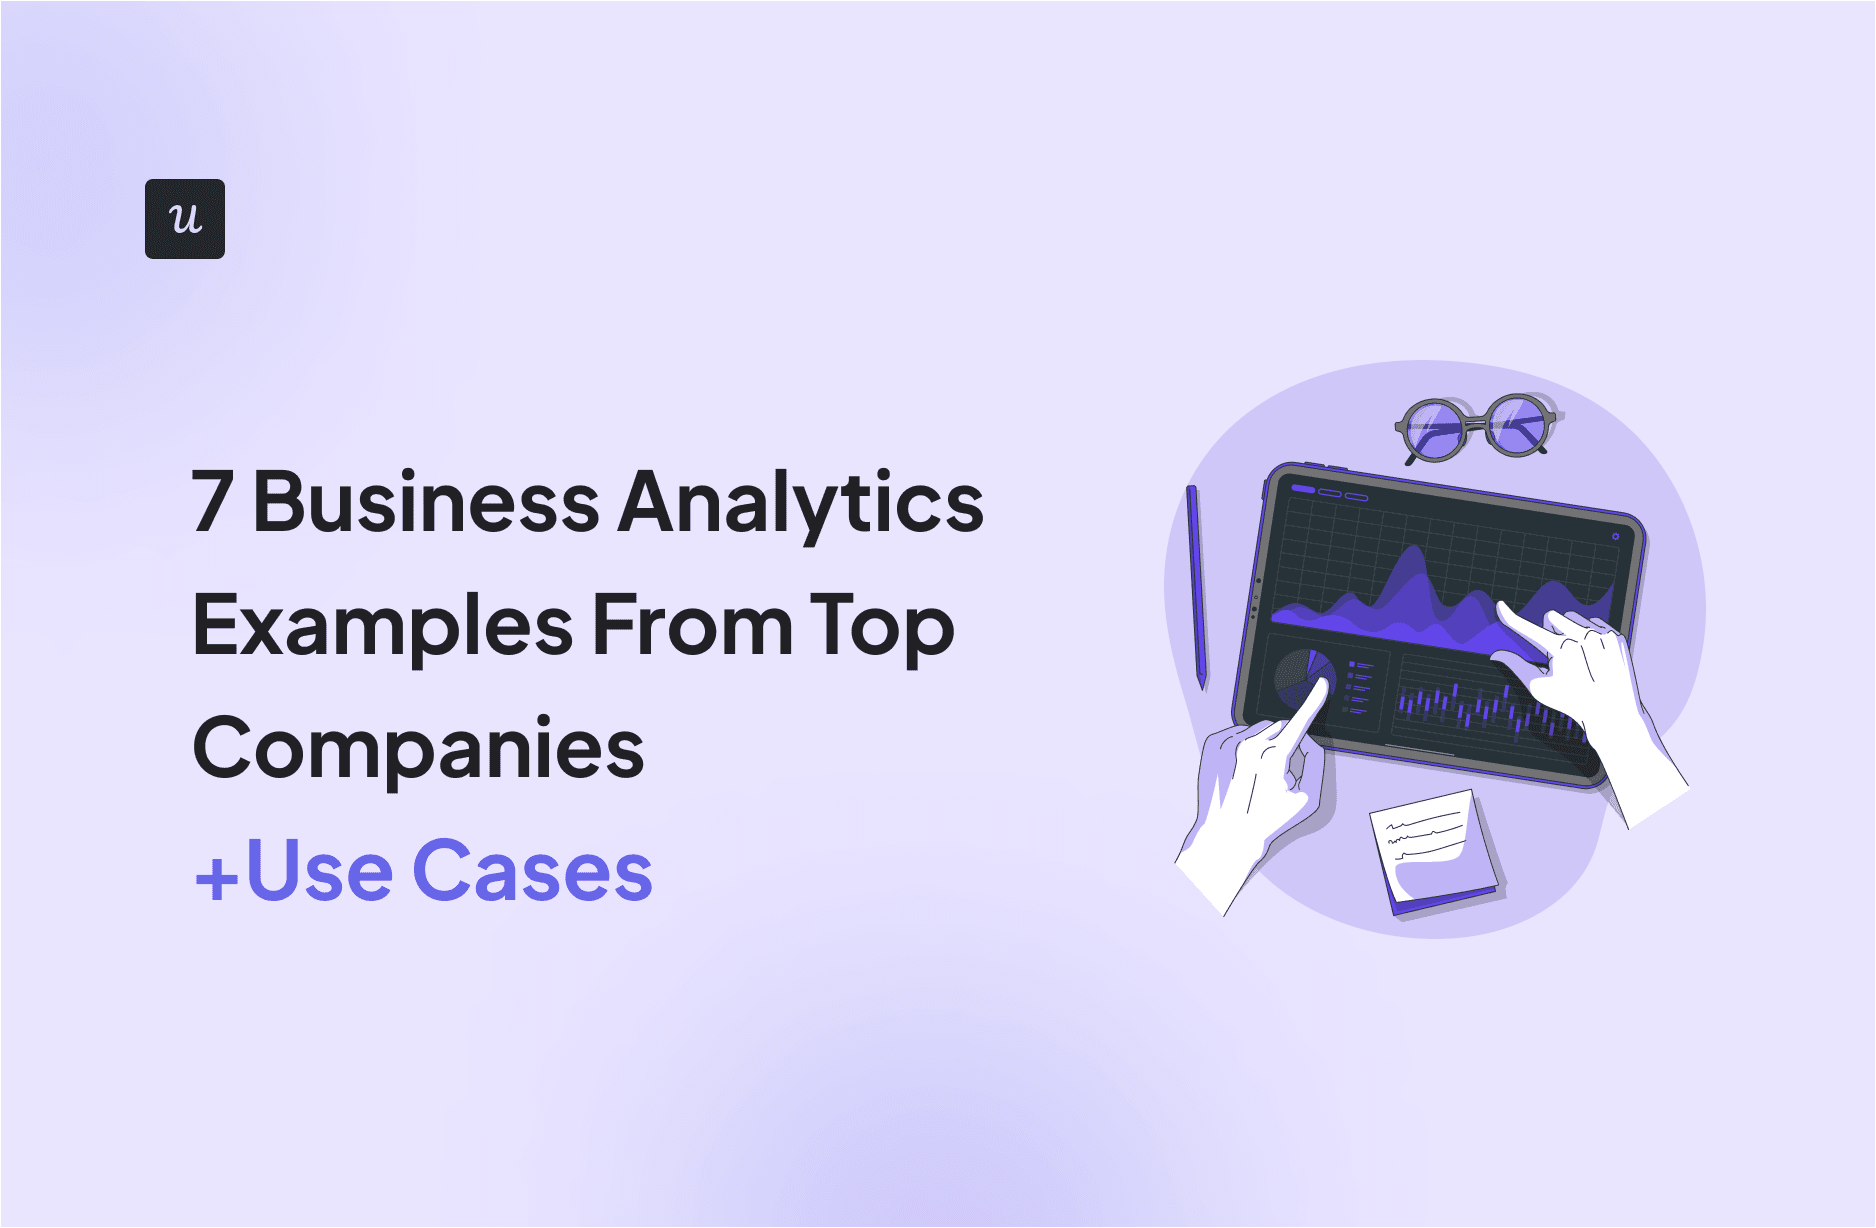 7 Business Analytics Examples From Top Companies (+Use Cases) cover